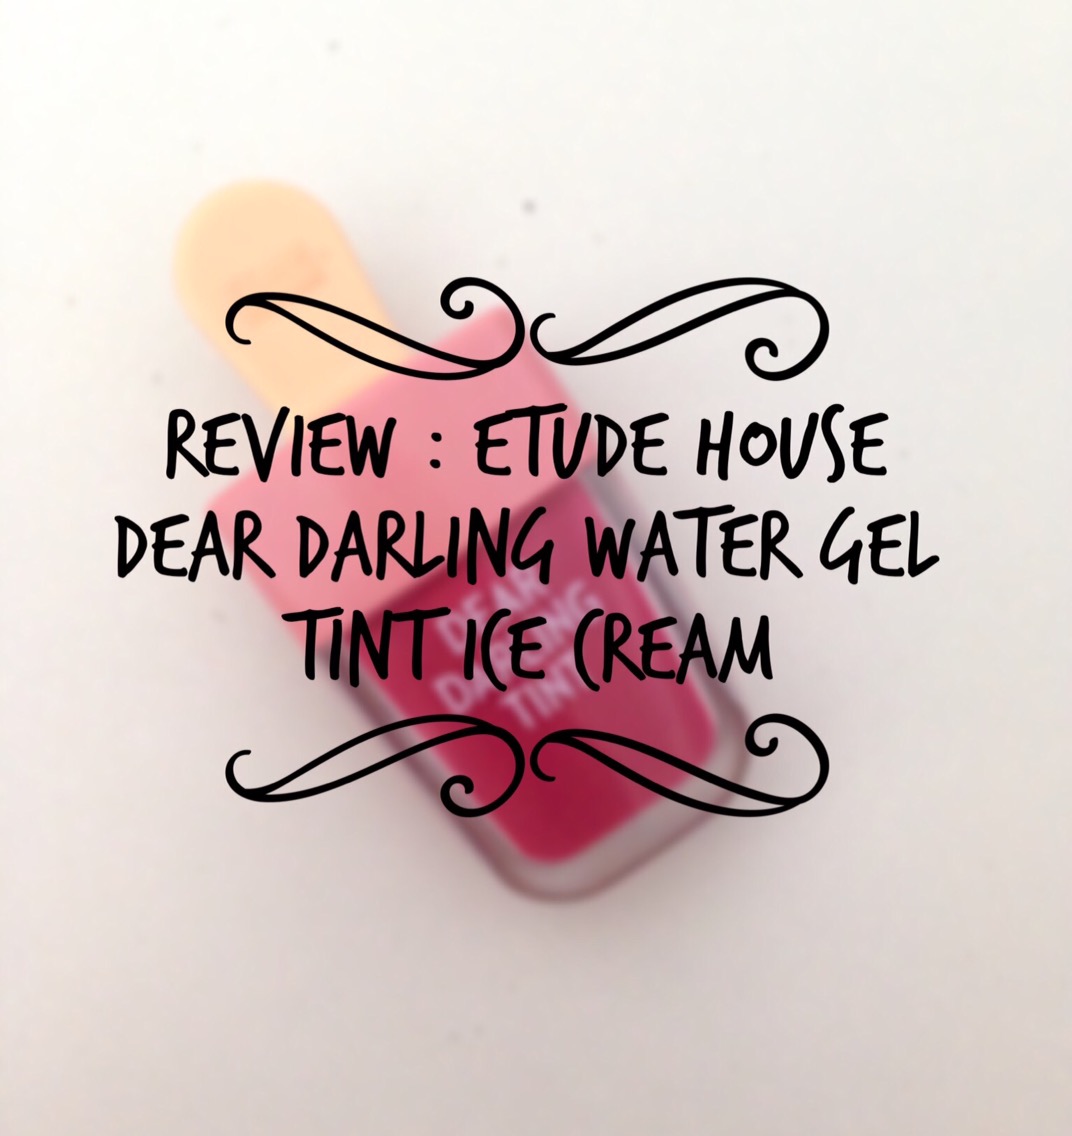 Review: Etude House Dear Darling Water Gel Tint Ice Cream